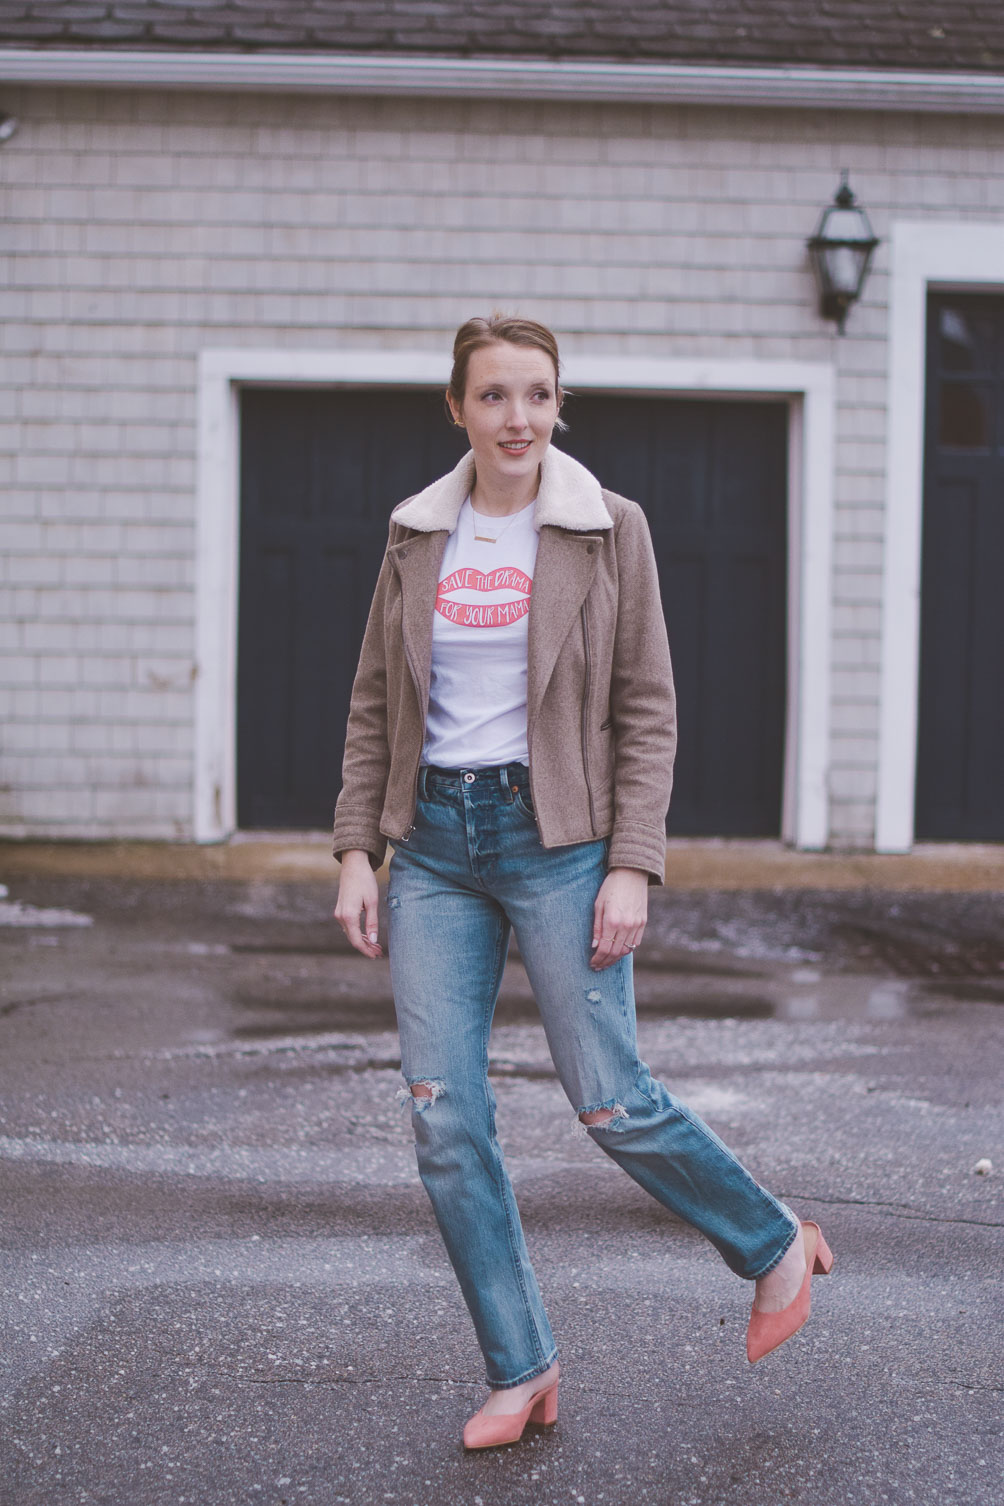 wearing Gap x Cone Denim high rise straight jeans with a shearling collar jacket, graphic tee, and pink block heel mules